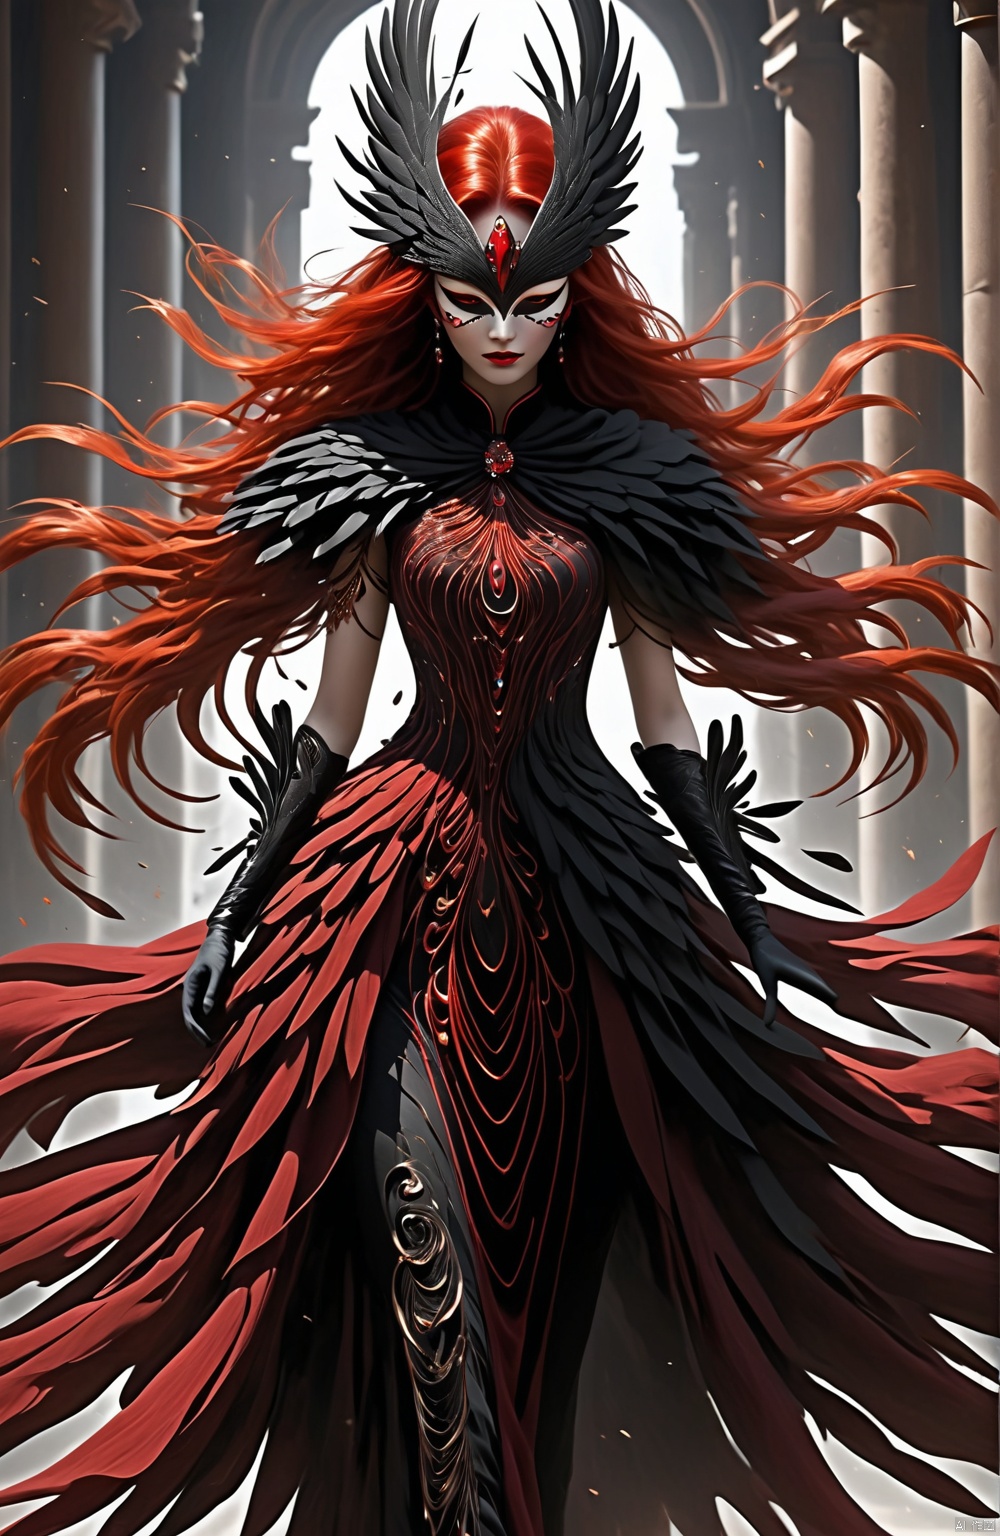  1girl,(red feather_dress),red hair,mask,(full body),
In this vivid portrayal, we see a distinctive girl who captivates attention with her striking attire. She dons an intricately crafted red feather dress, each feather seemingly imbued with vitality, dancing in harmony with every move she makes. The fiery red hue of the gown reflects a passionate spirit and embodies a sense of intensity and theatricality.

Her mane of red hair flows like flames around her facial contours, adding layers to her enigmatic allure. Cascading down her back, it contrasts and complements the feathered hem of the dress, seamlessly blending natural vibrancy with opulent fashion.

A mask adorns her face, revealing only her eyes as portals into her soul. The presence of the mask adds an air of mystery, concealing her identity while amplifying the dramatic effect of her presented image. Whether she is a performer or an embodiment of a dream world, this mysterious woman in her scarlet feathered gown and matching crimson tresses mesmerizes all who behold her.
, bailing_darkness, niji5